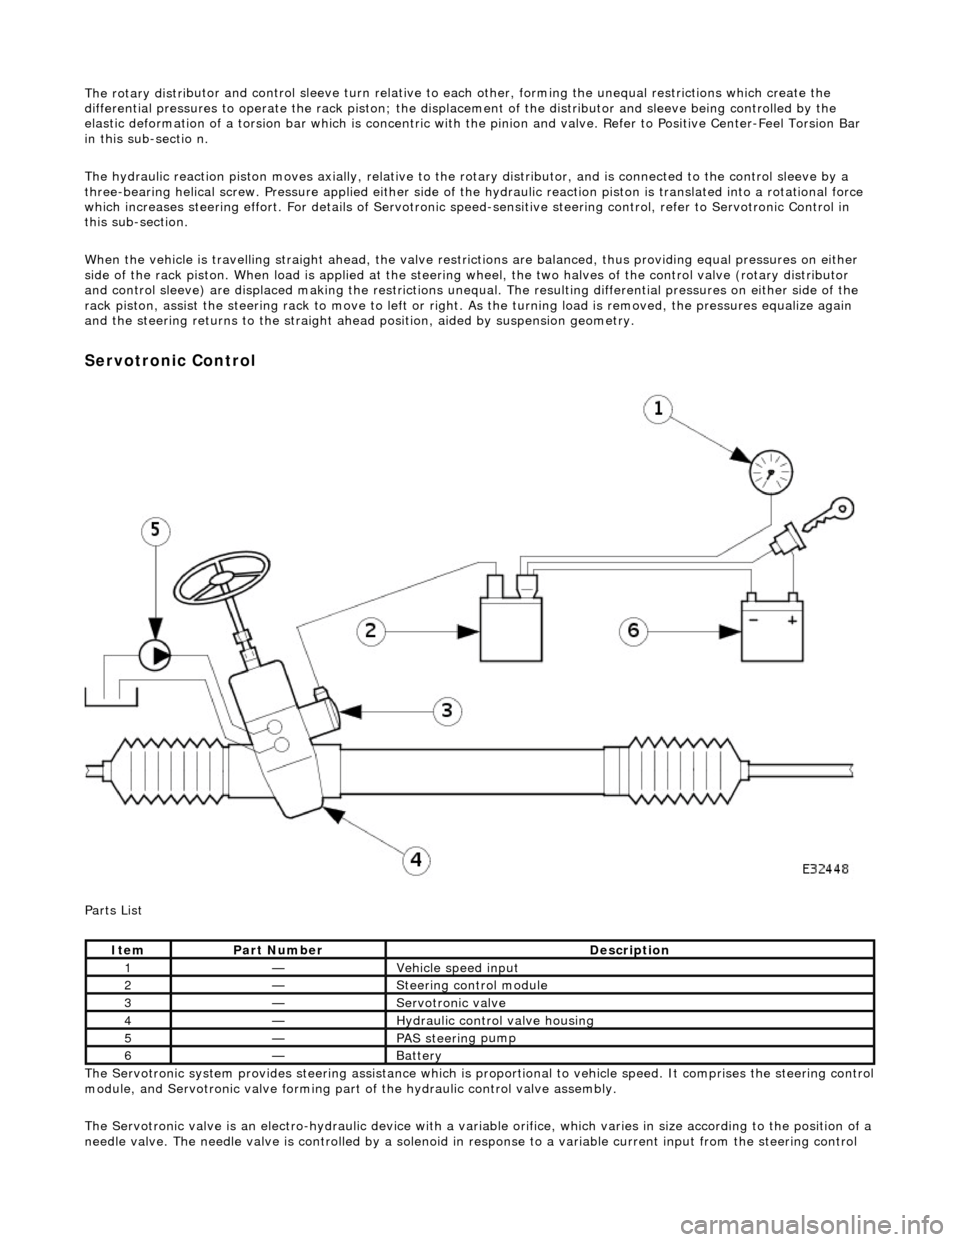 JAGUAR X308 1998 2.G Workshop Manual The rotary distri
 butor and control sleeve turn relative to ea
ch other, forming the unequal restrictions which create the 
differential pressures to operat e the rack piston; the displacement of the